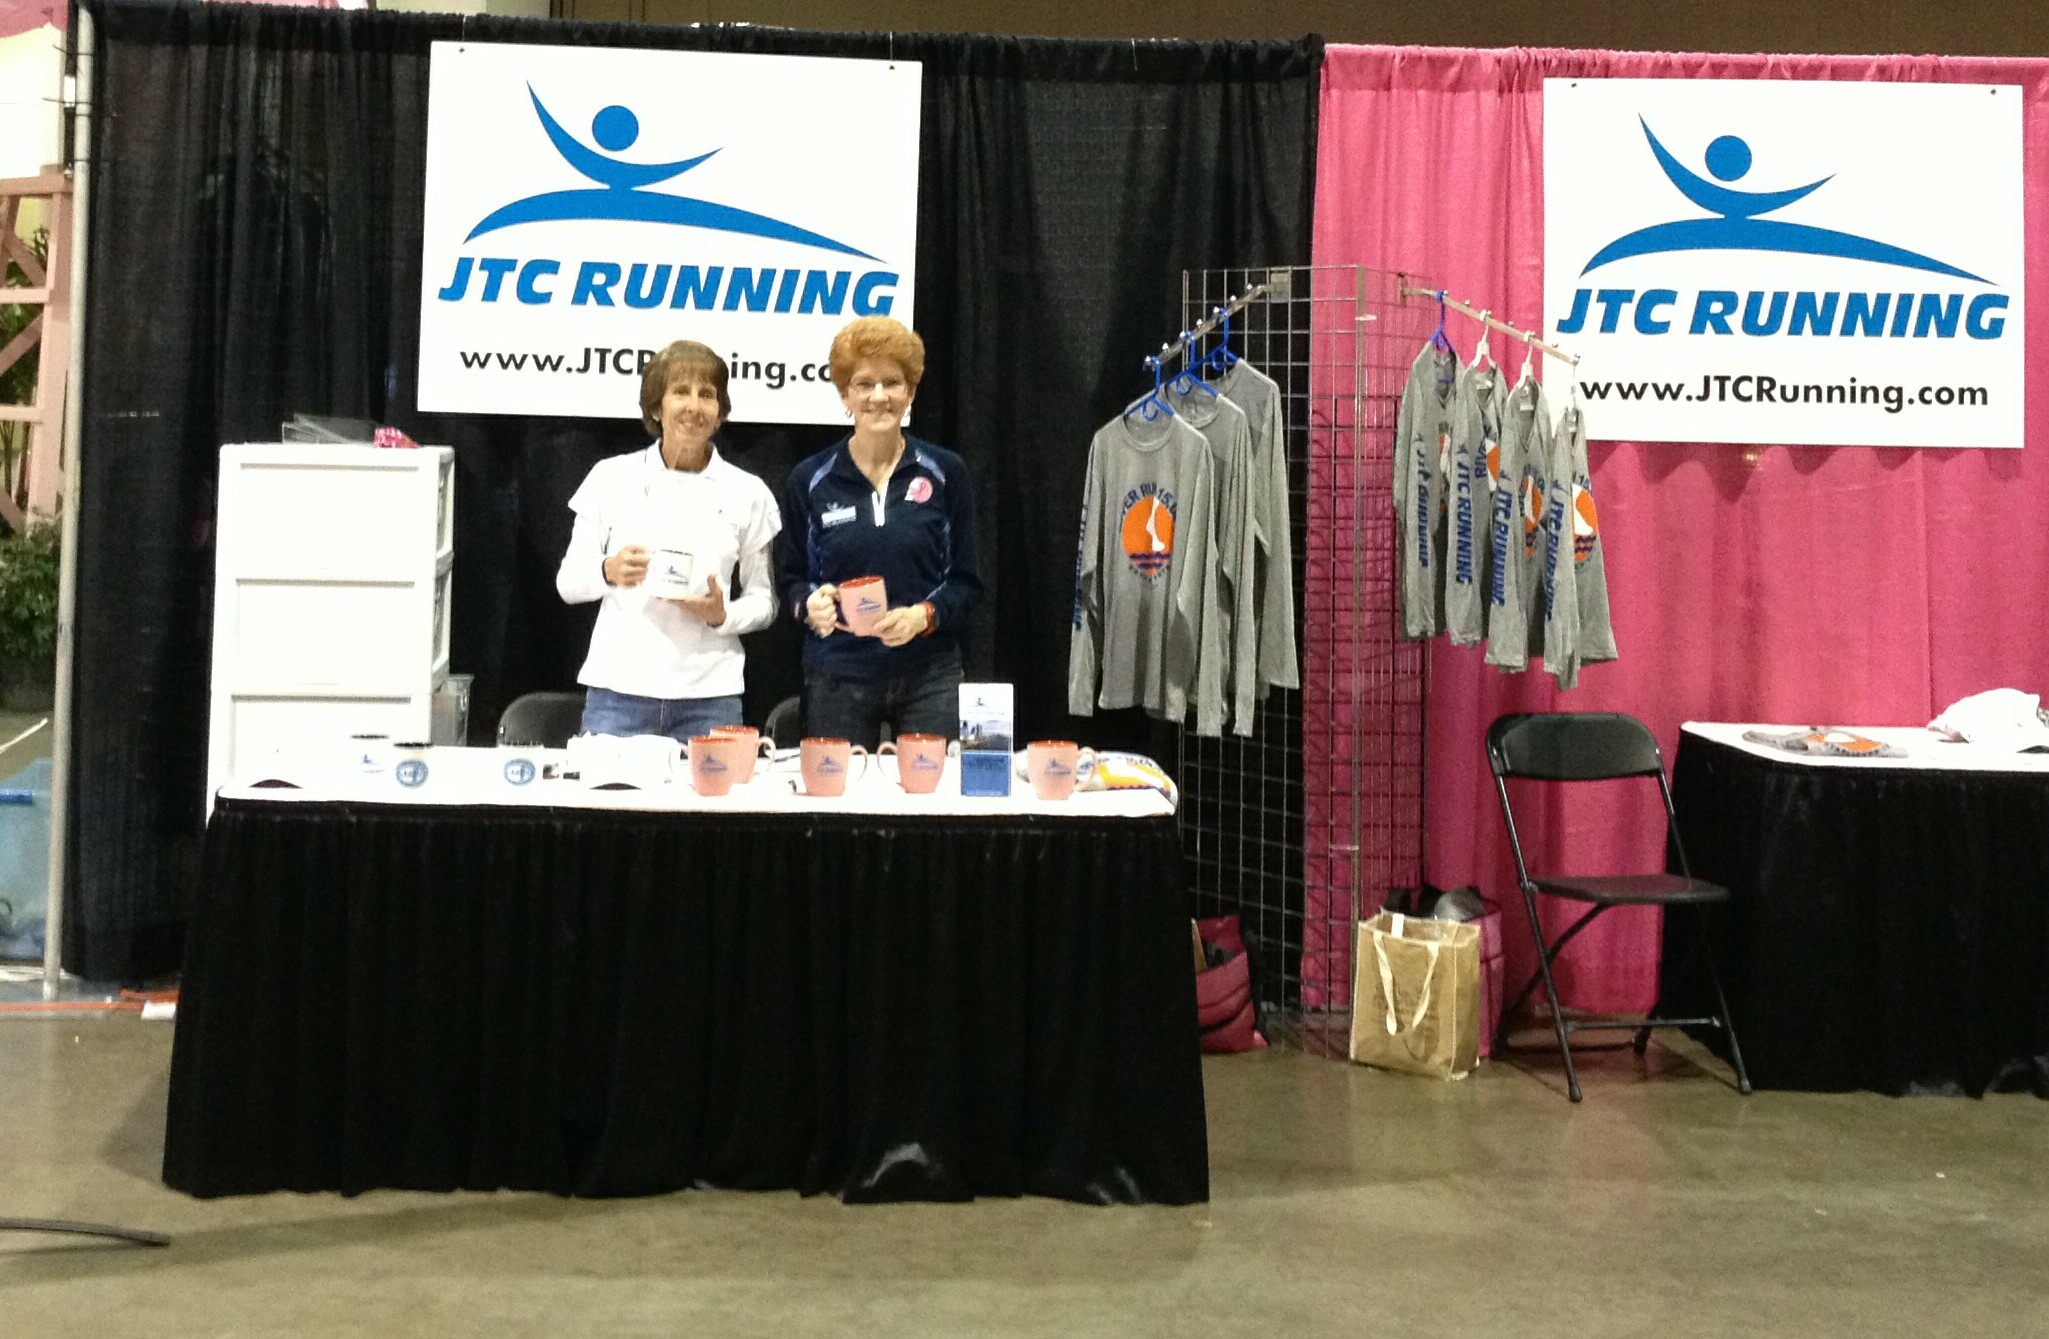 JTC Running Booth and Tent at Gate River Run a Big Success